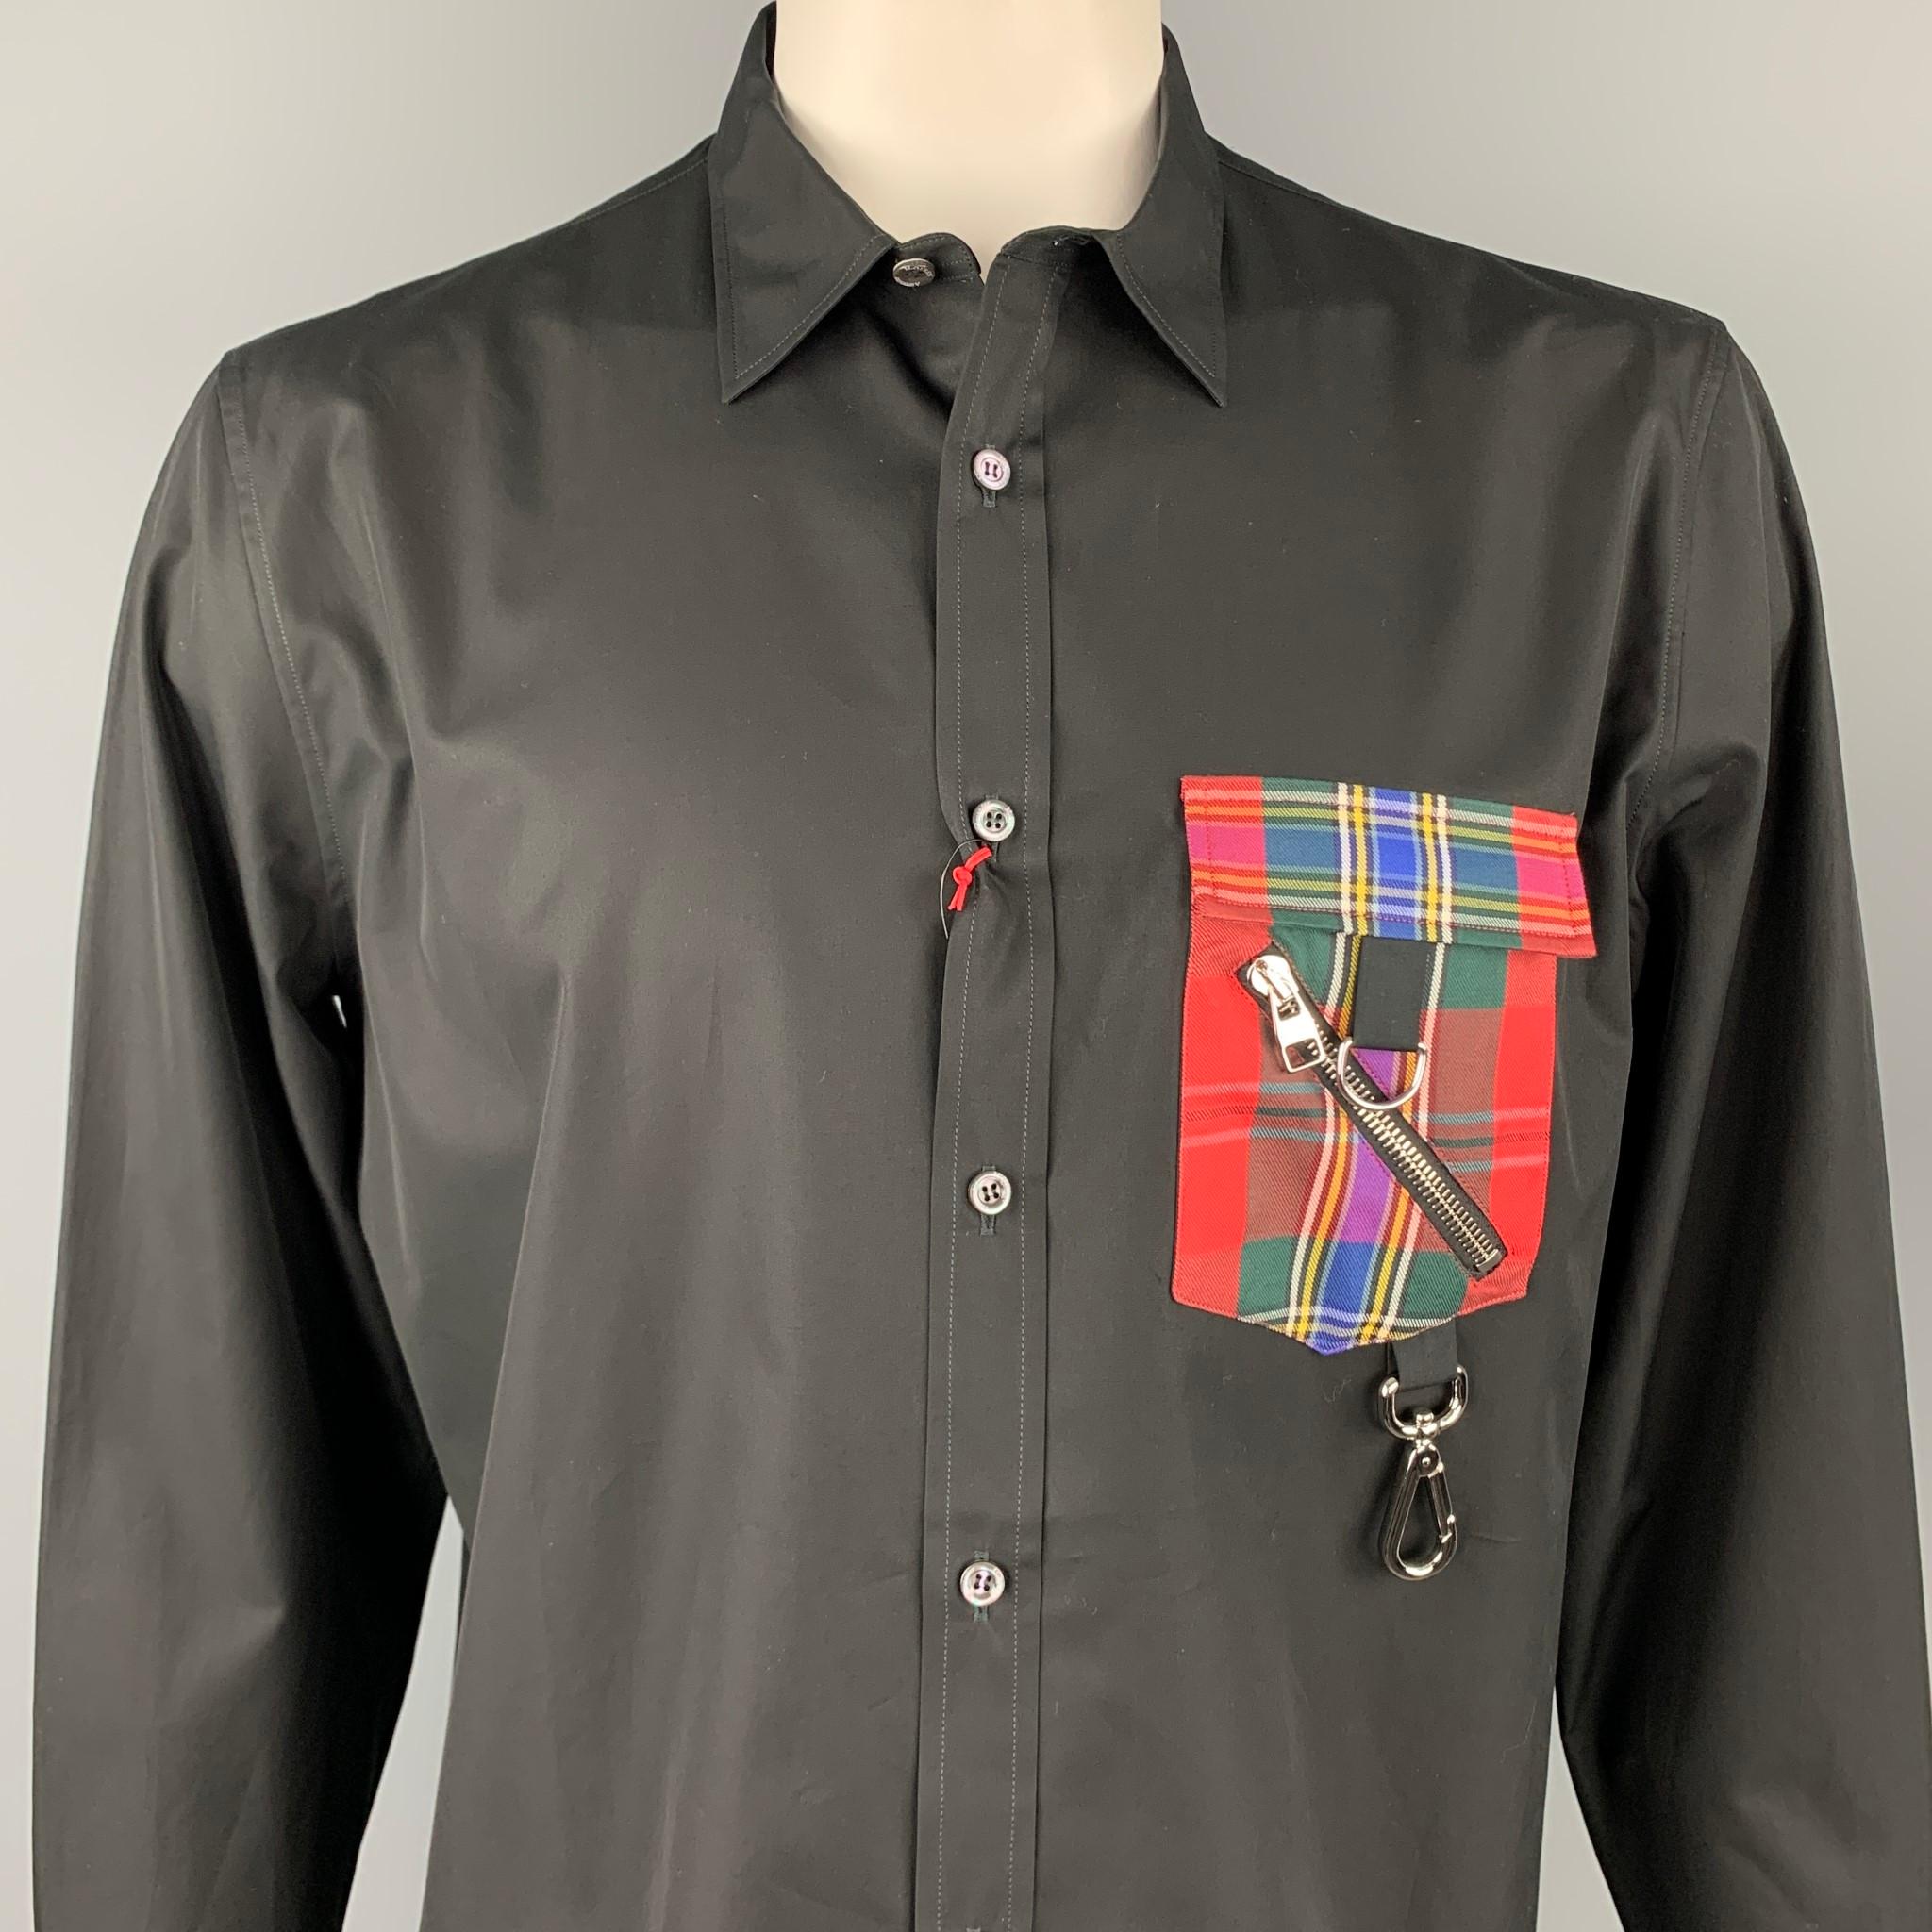 ALEXANDER McQUEEN long sleeve shirt comes in a black cotton with a red plaid front pocket detail featuring a button up style, silver tone hardware, and a spread collar. Made in Italy.

New With Tags. 
Marked: 17 +

Measurements:

Shoulder: 19.5